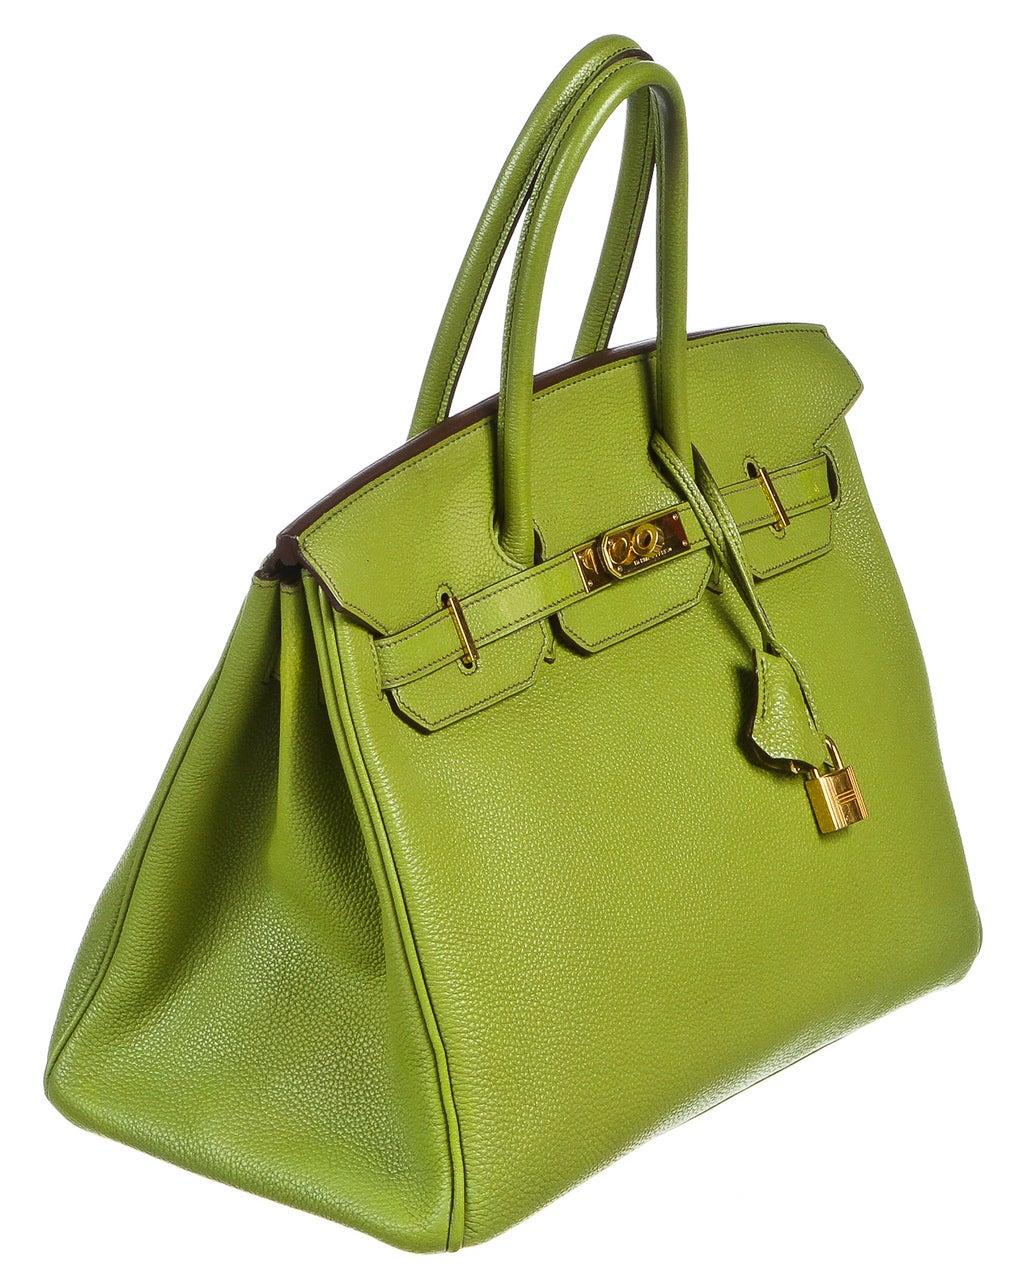 This gorgeous 35cm Birkin has been crafted from Vert Anis togo leather which is noted for rich texture and durability. This Birkin also features polished gold tone hardware. The interior is lined in luxurious leather in matching color. The Birkin is